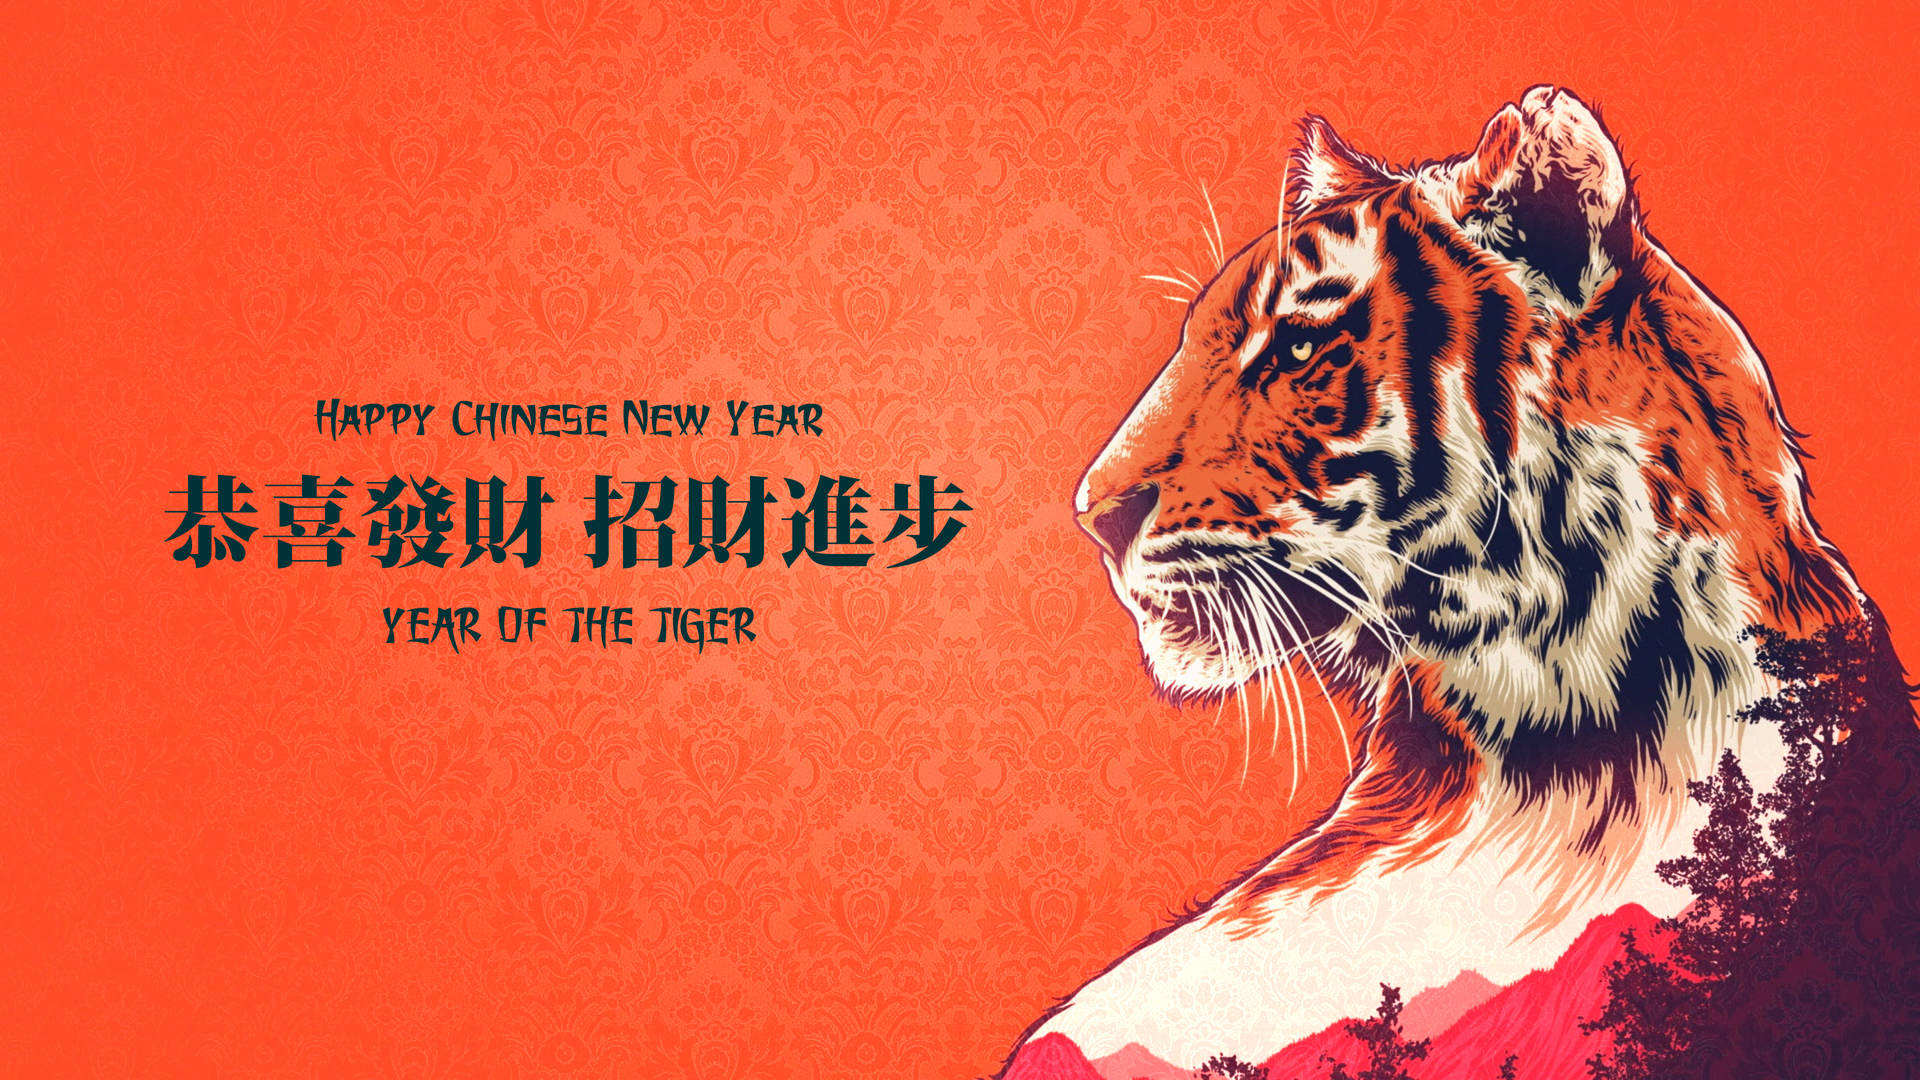 200+] Chinese New Year Wallpapers for FREE 